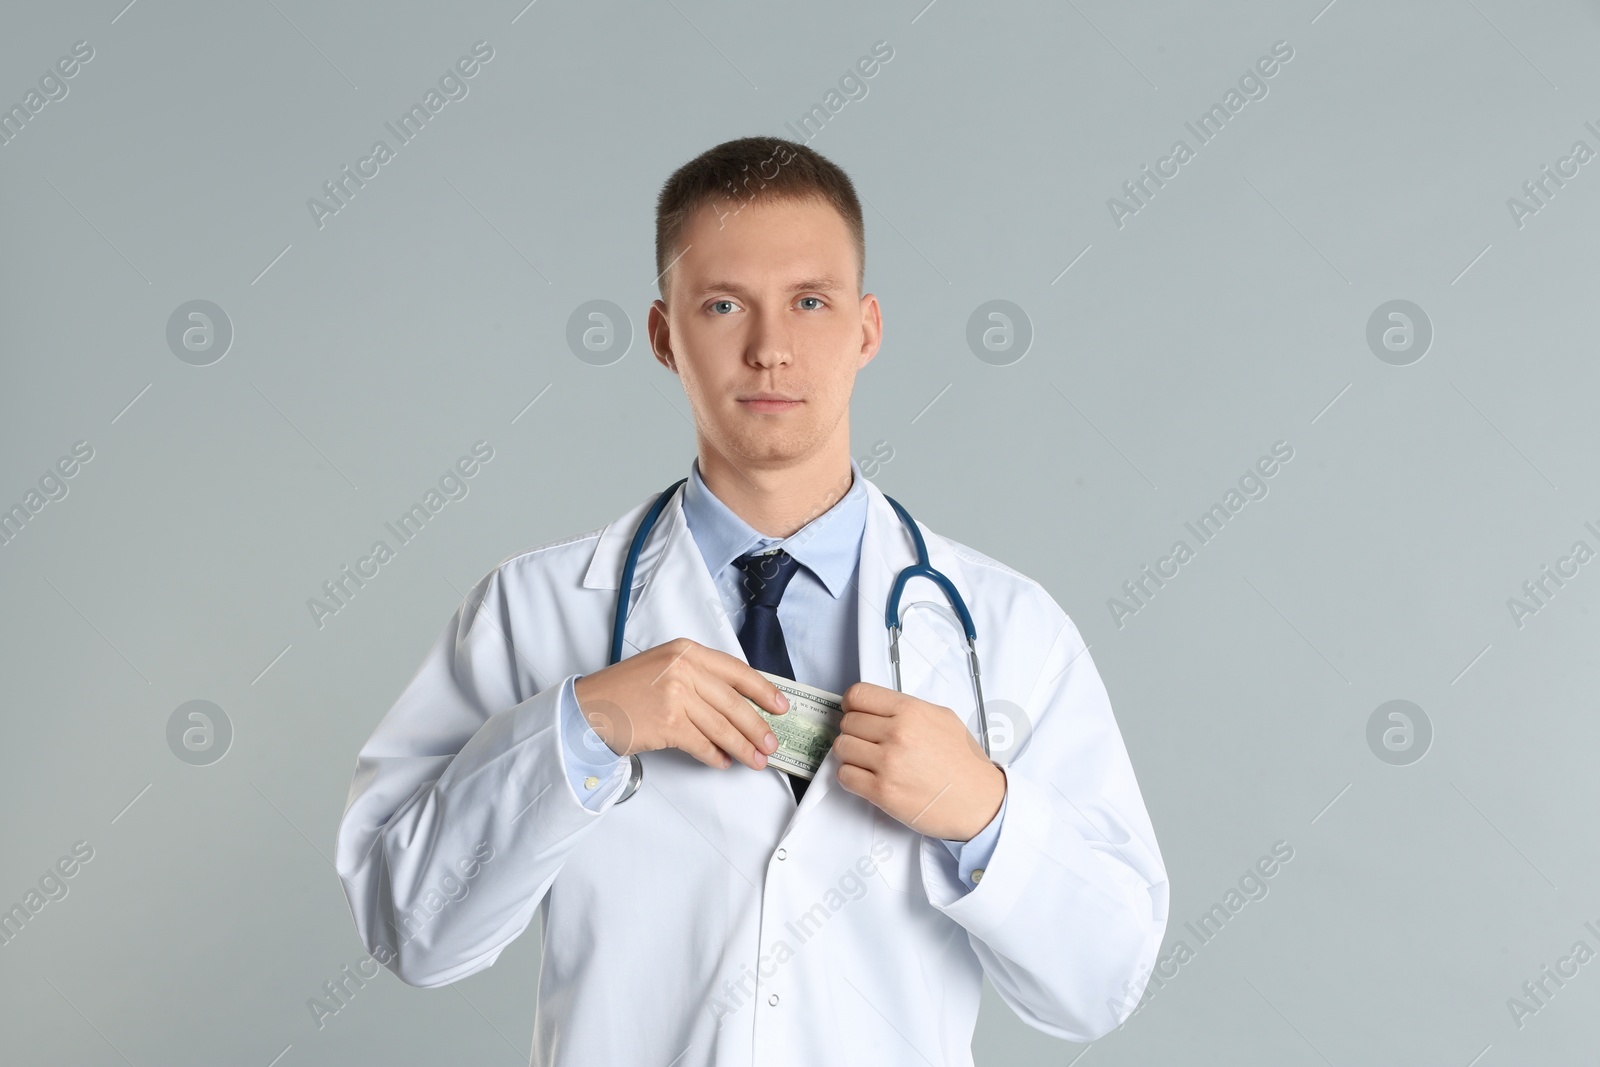 Photo of Doctor putting bribe into pocket on grey background. Corruption in medicine